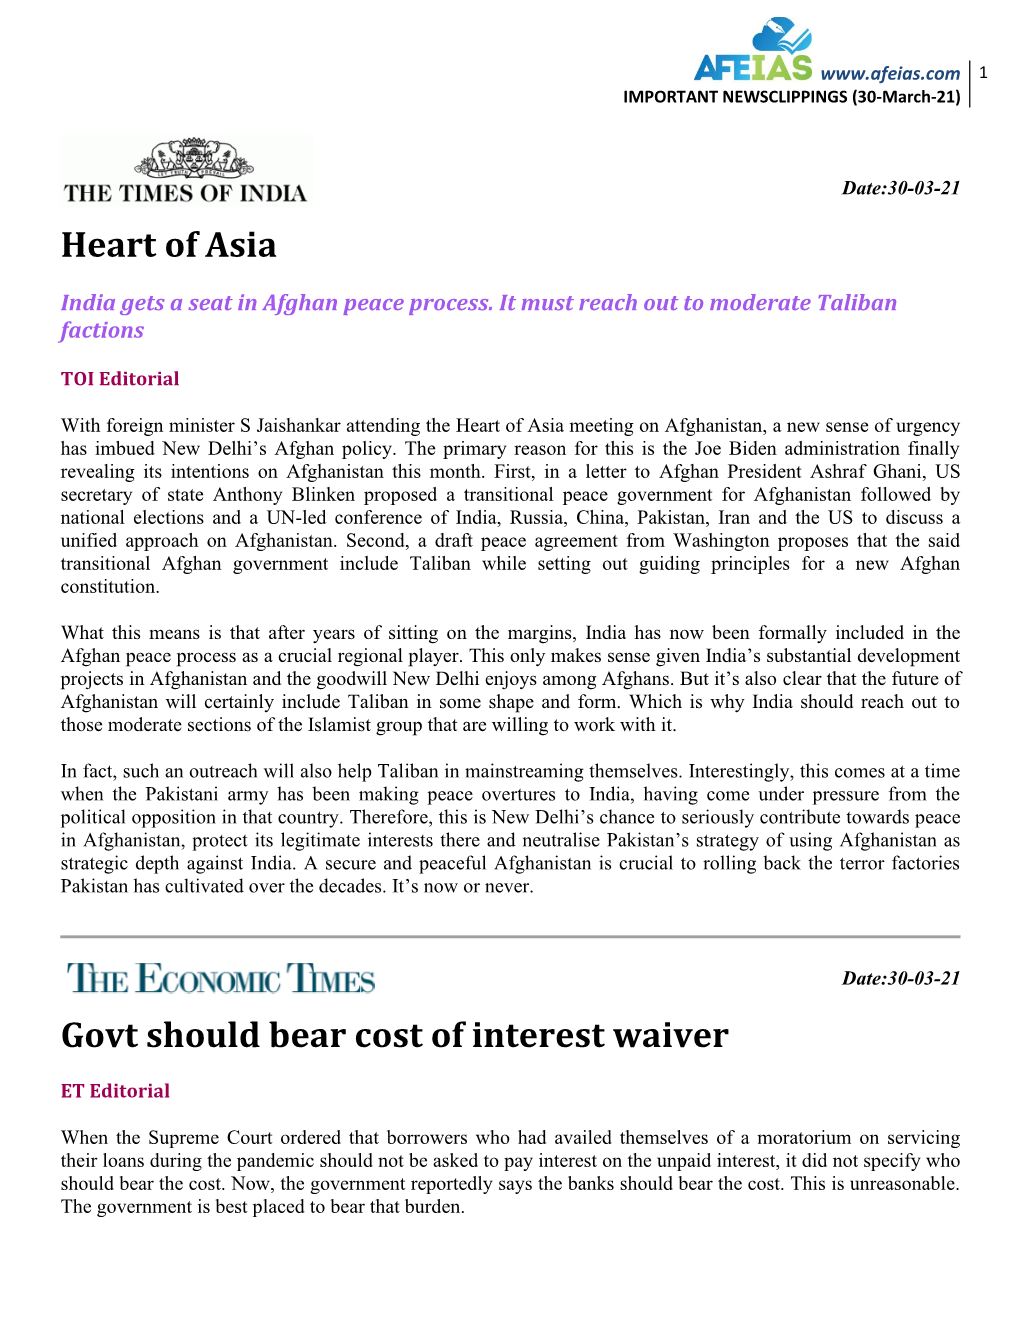 Heart of Asia Govt Should Bear Cost of Interest Waiver